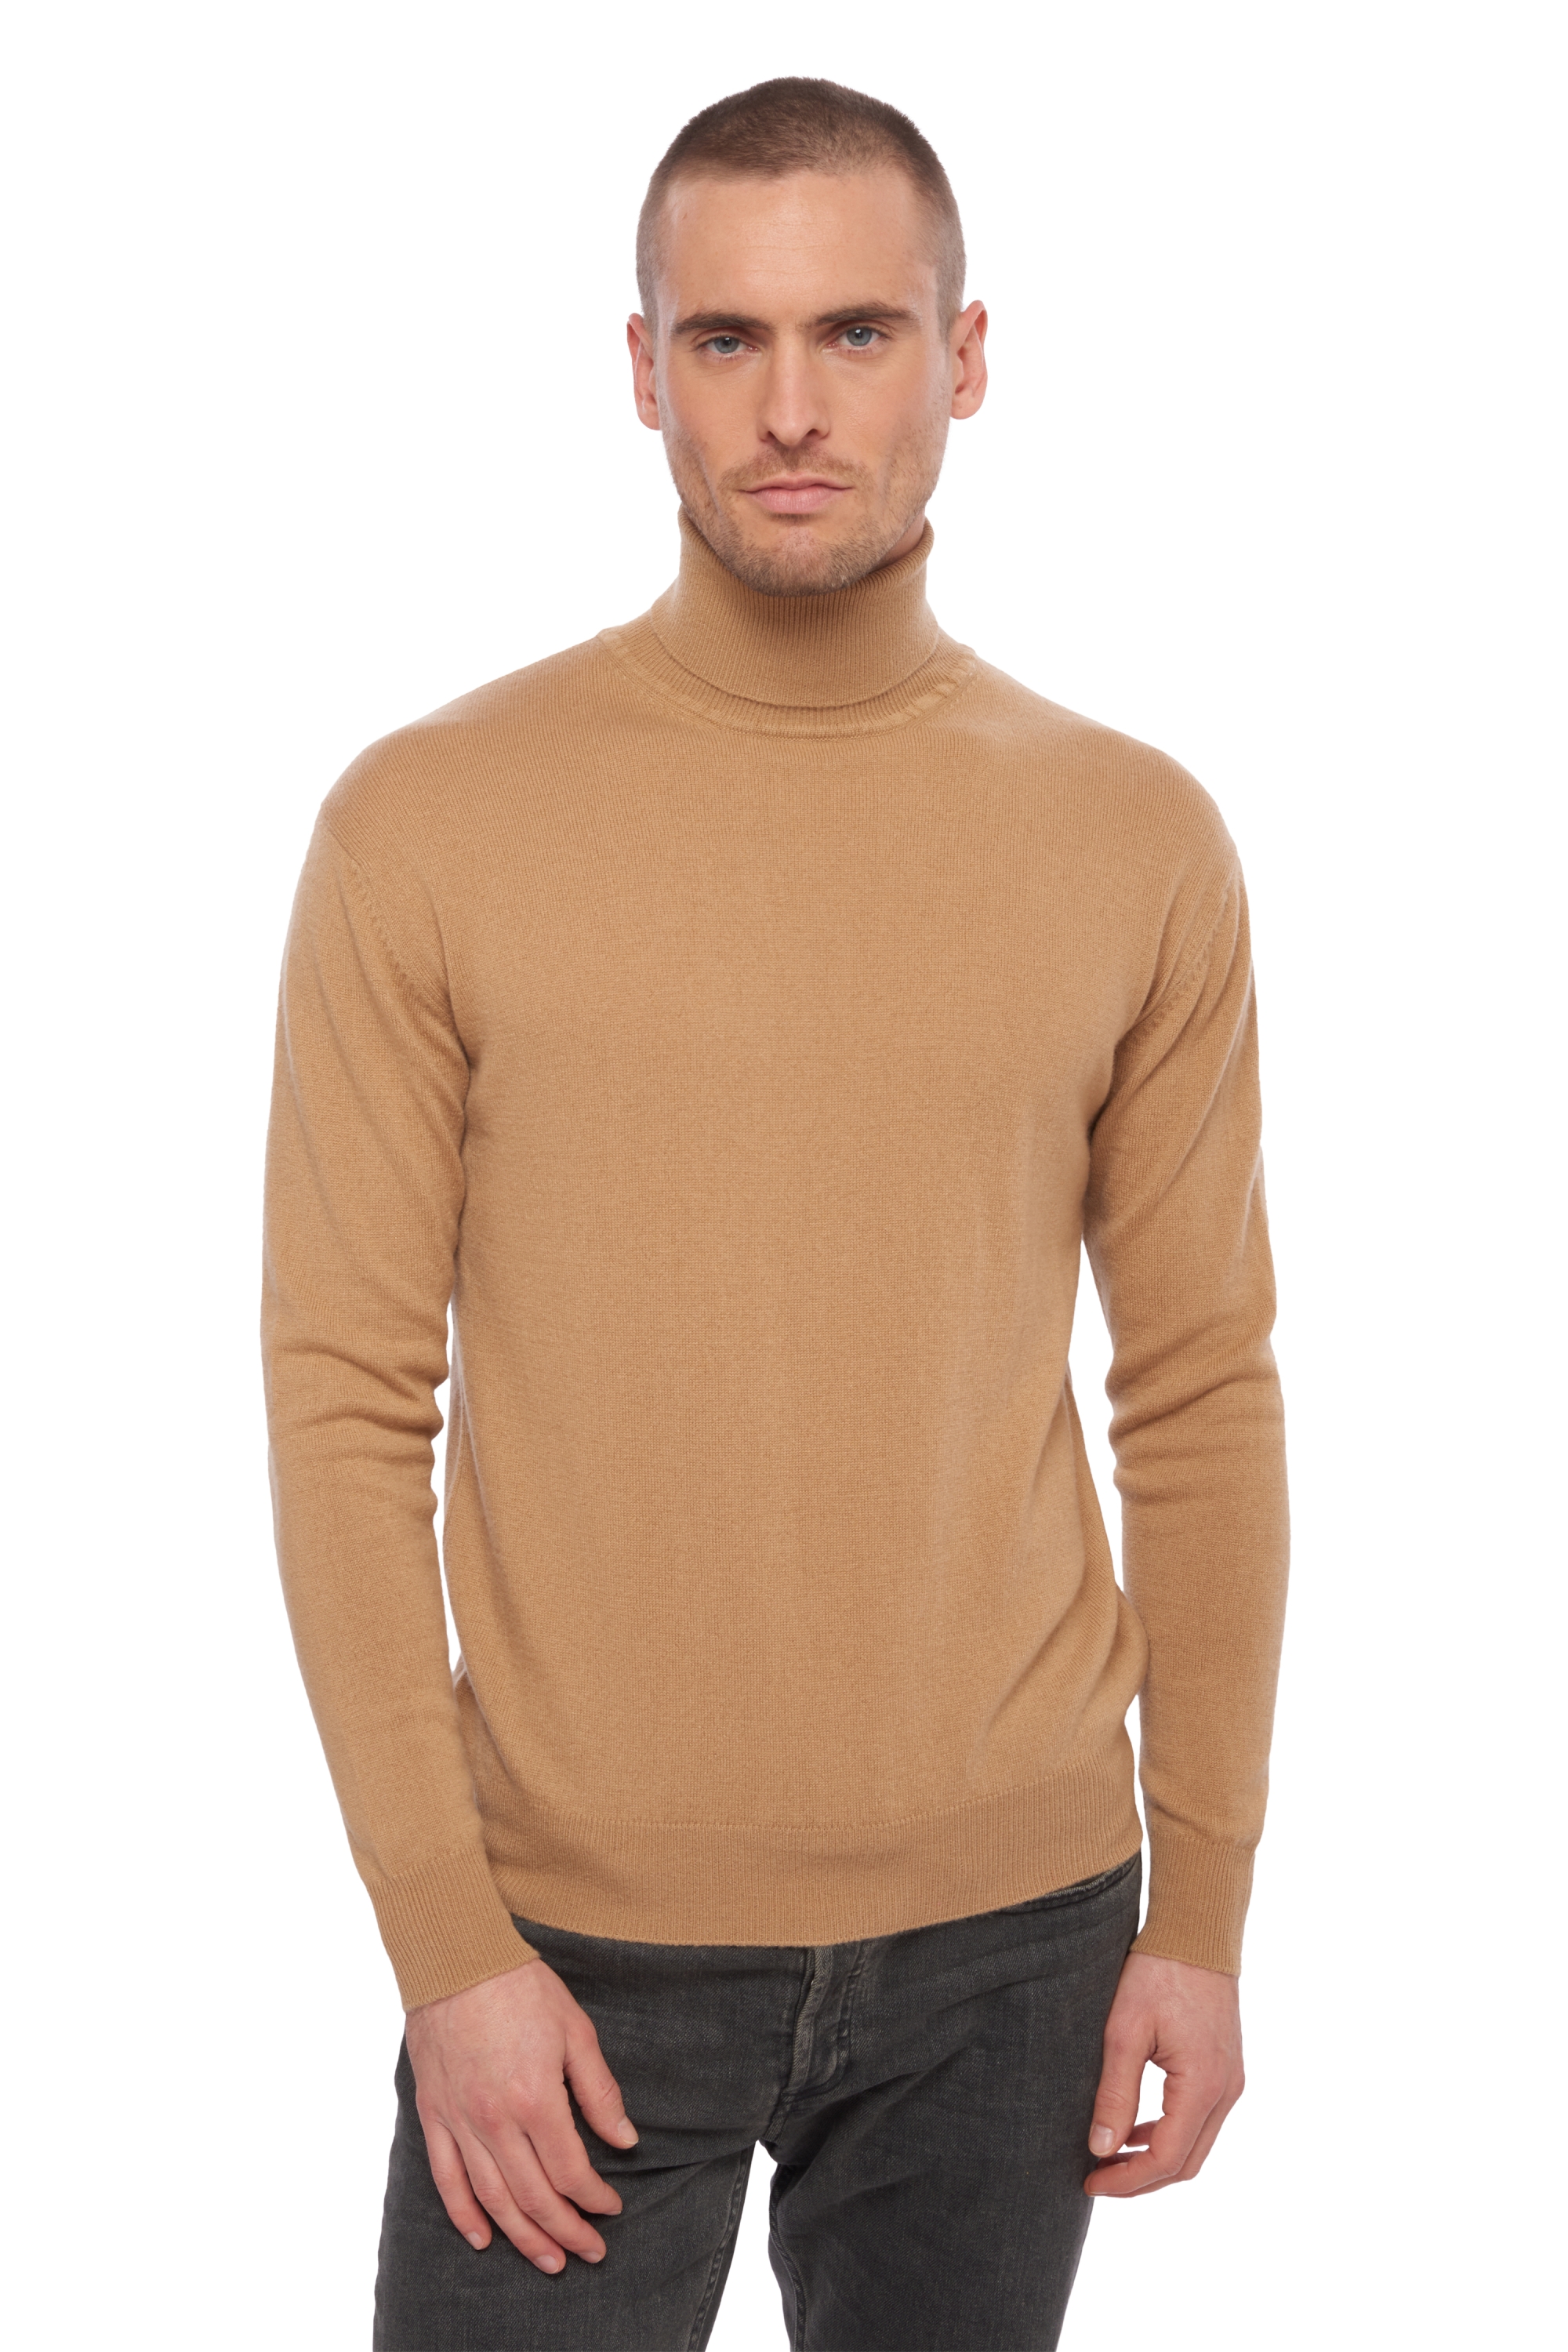 Cachemire pull homme col roule edgar camel 2xl